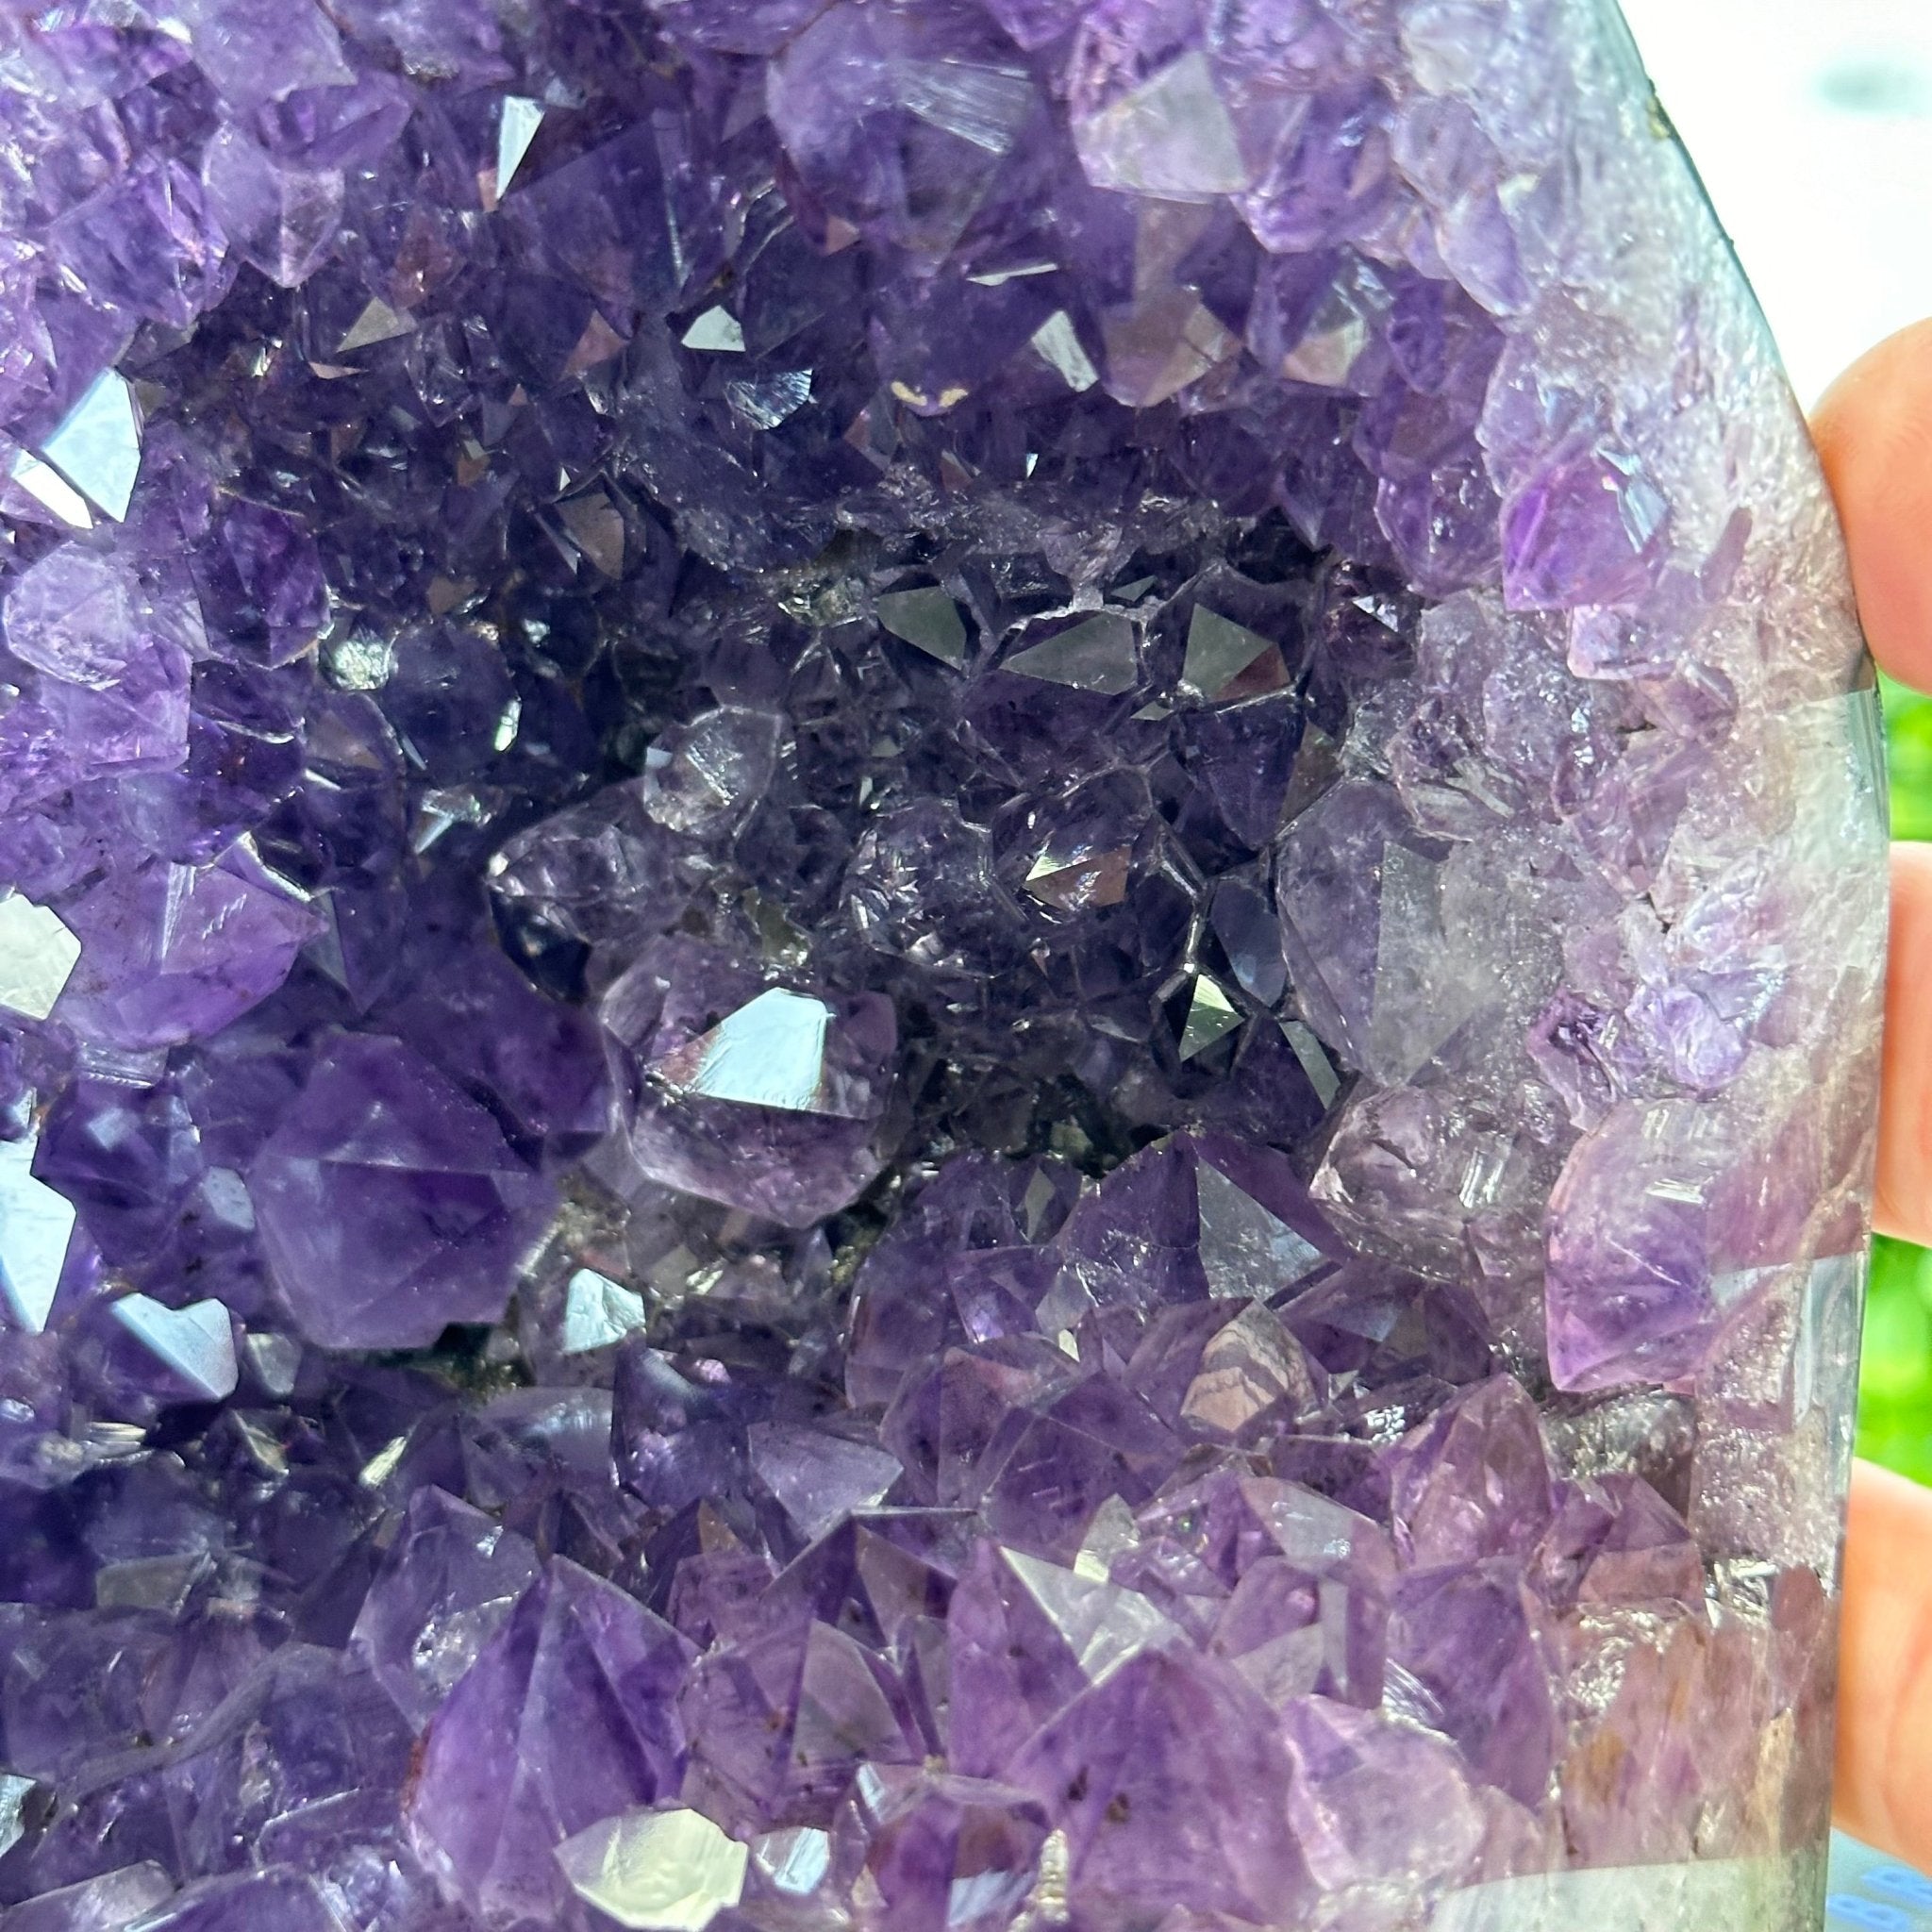 Quality Brazilian Amethyst Cathedral, 11.1 lbs & 9.6" Tall, #5601 - 1354 - Brazil GemsBrazil GemsQuality Brazilian Amethyst Cathedral, 11.1 lbs & 9.6" Tall, #5601 - 1354Cathedrals5601 - 1354